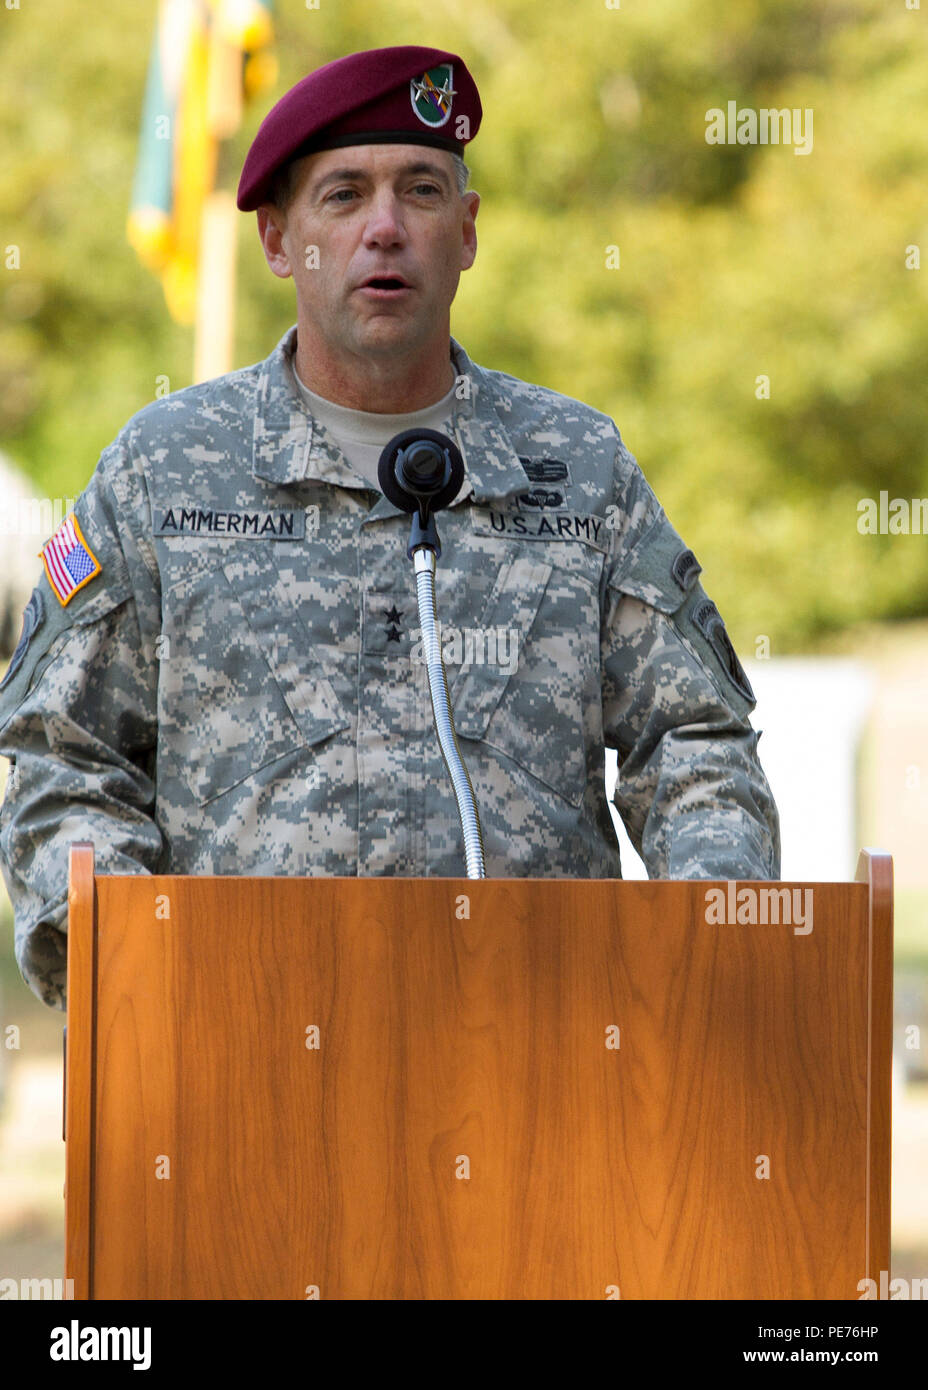 Maj Gen Daniel Ammerman The Commanding General Of Us Army Civil Affairs And Psychological 5209